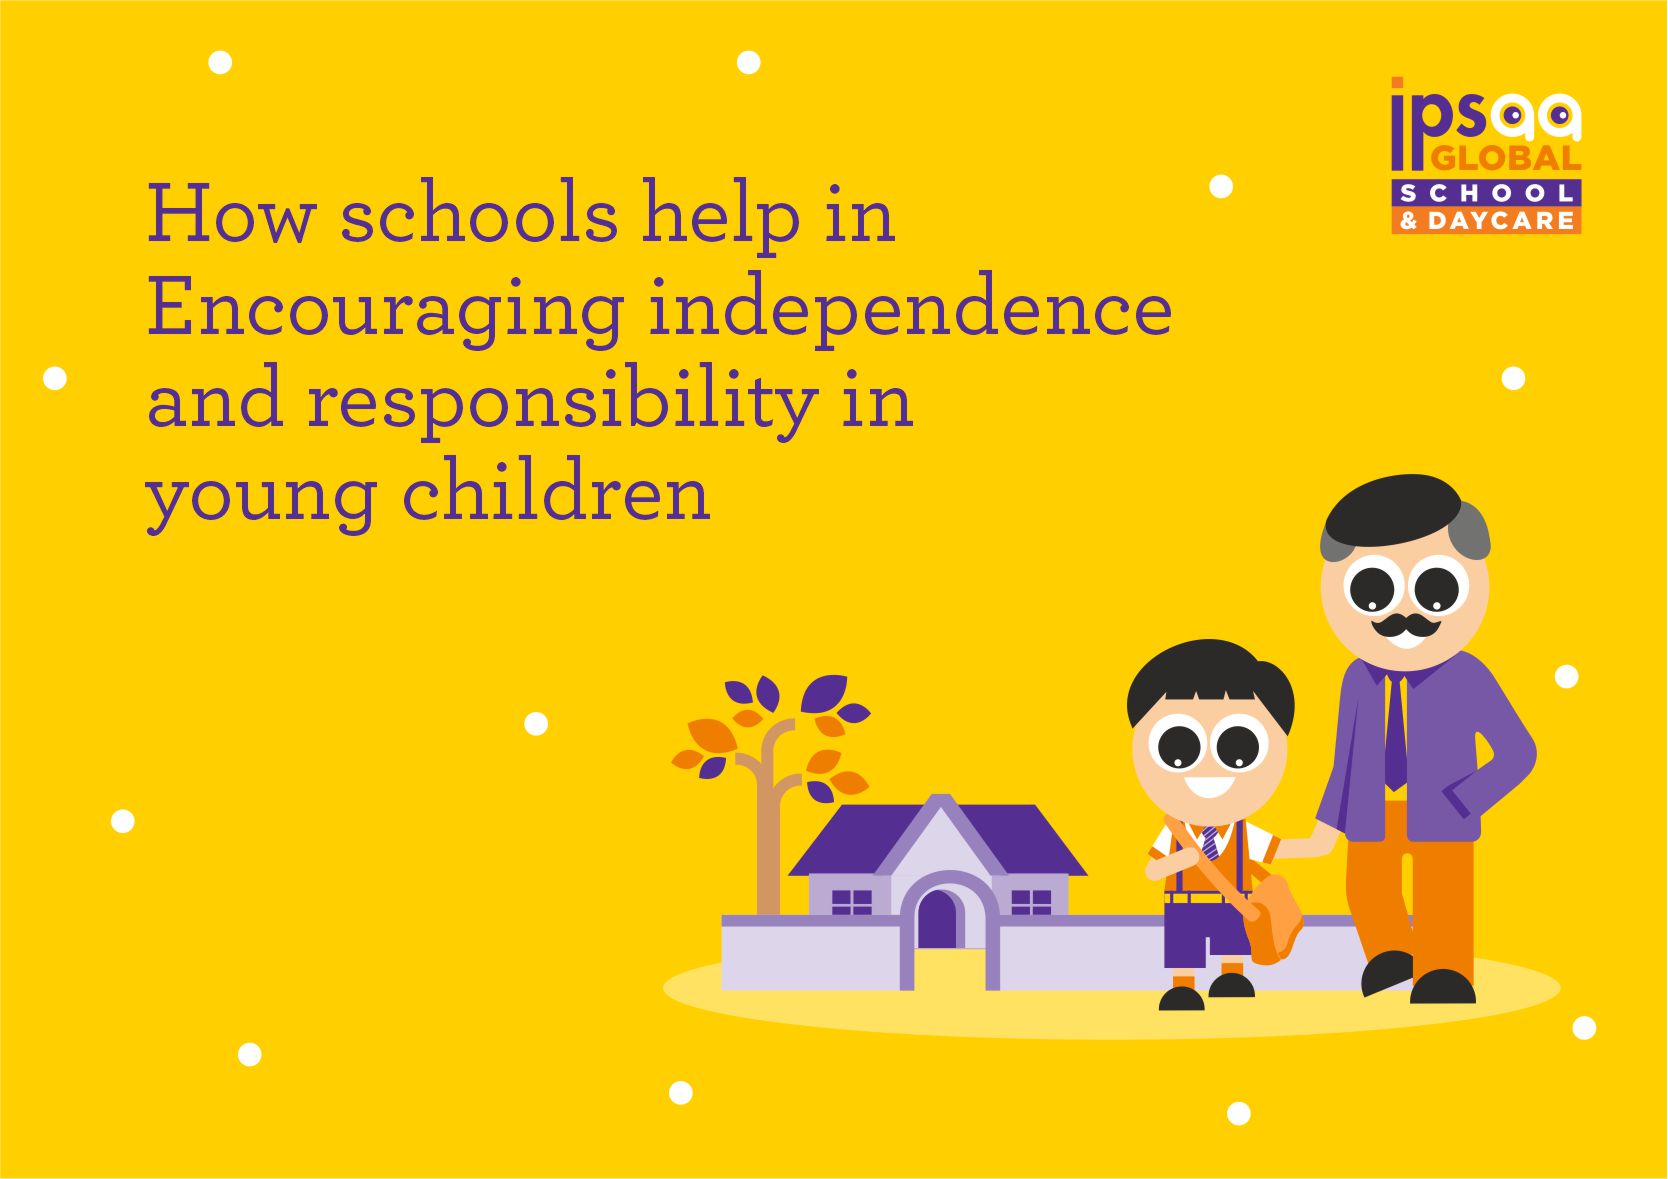 How schools help in Encouraging independence and responsibility in young children